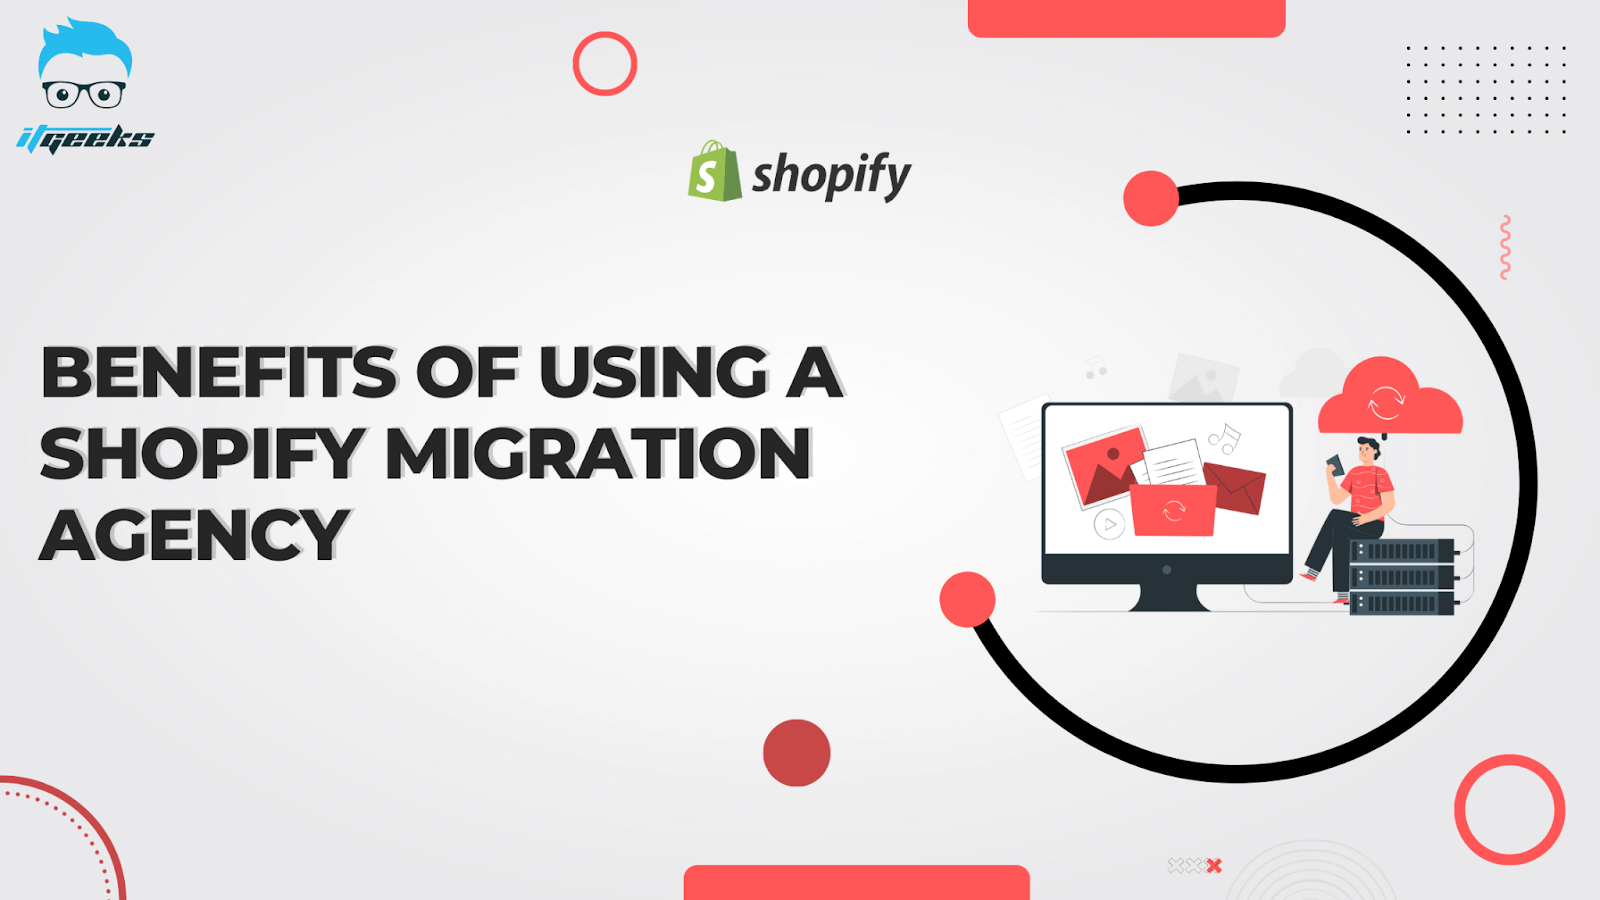 Benefits of Using a Shopify Migration Agency